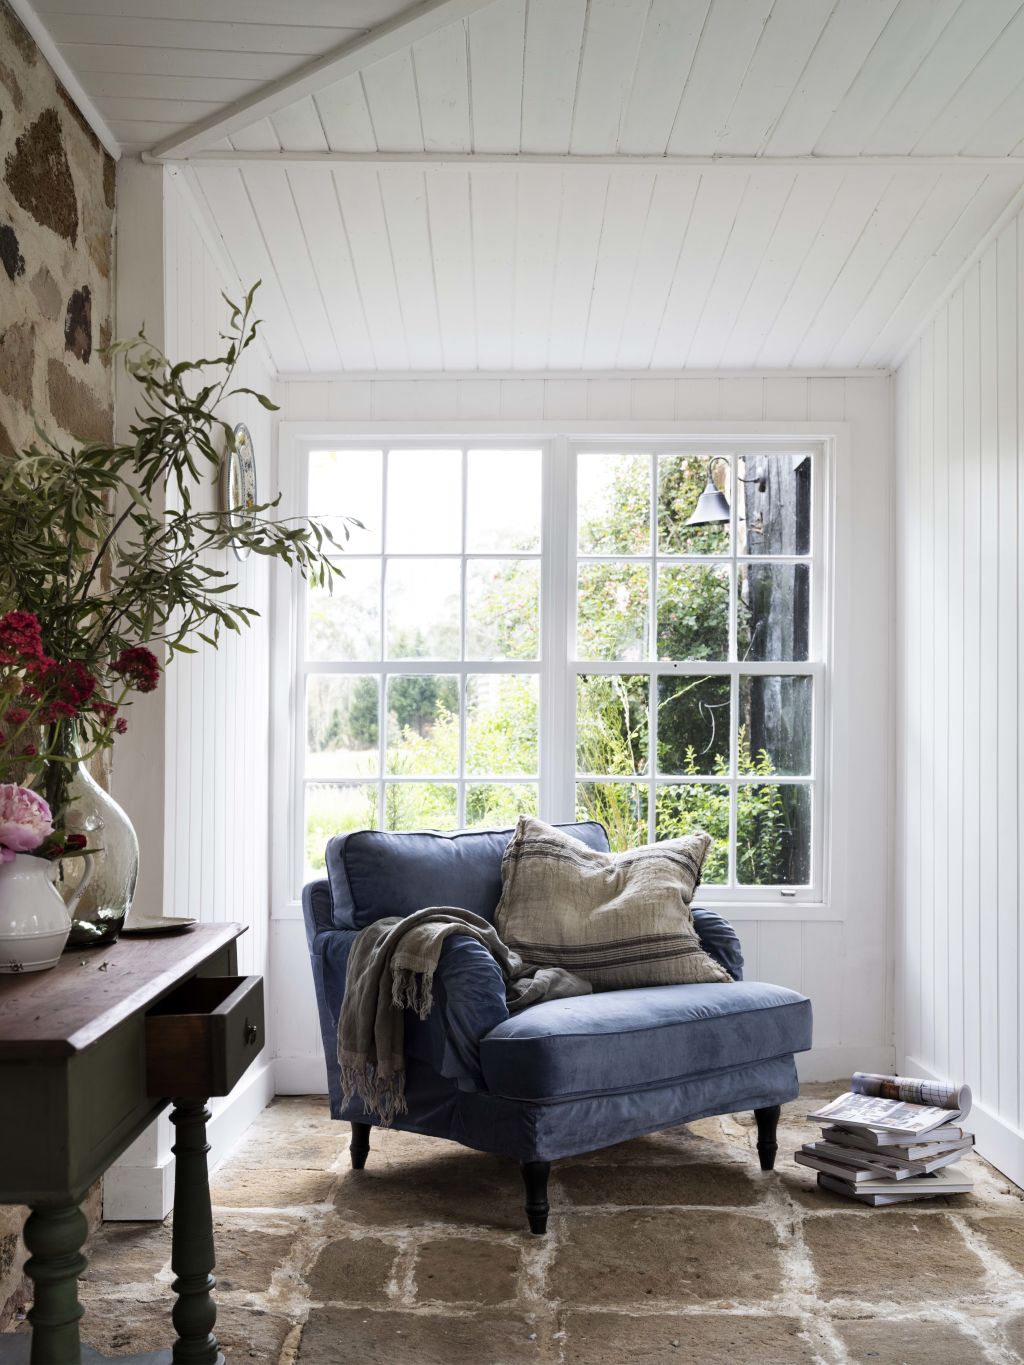 White walls provide the perfect backdrop for a fusion of vintage pieces. Photo: Supplied